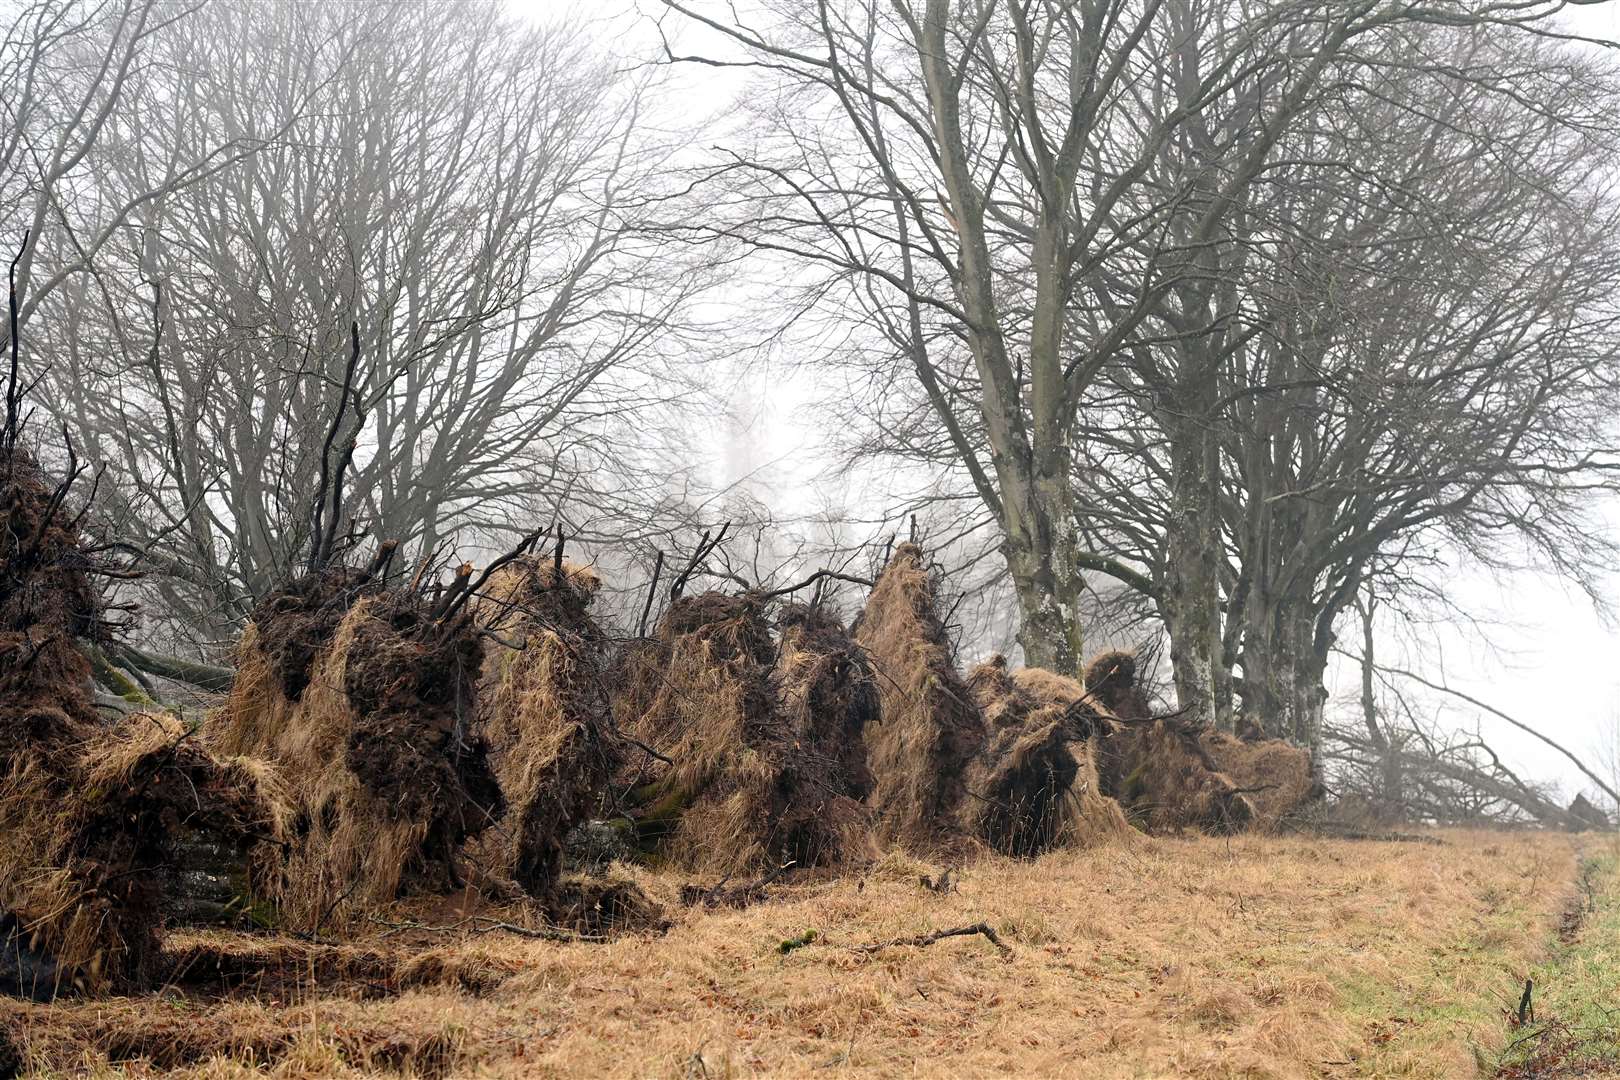 An estimated 16 million trees were uprooted in the storm (Kami Thomson/DCT Media/PA)